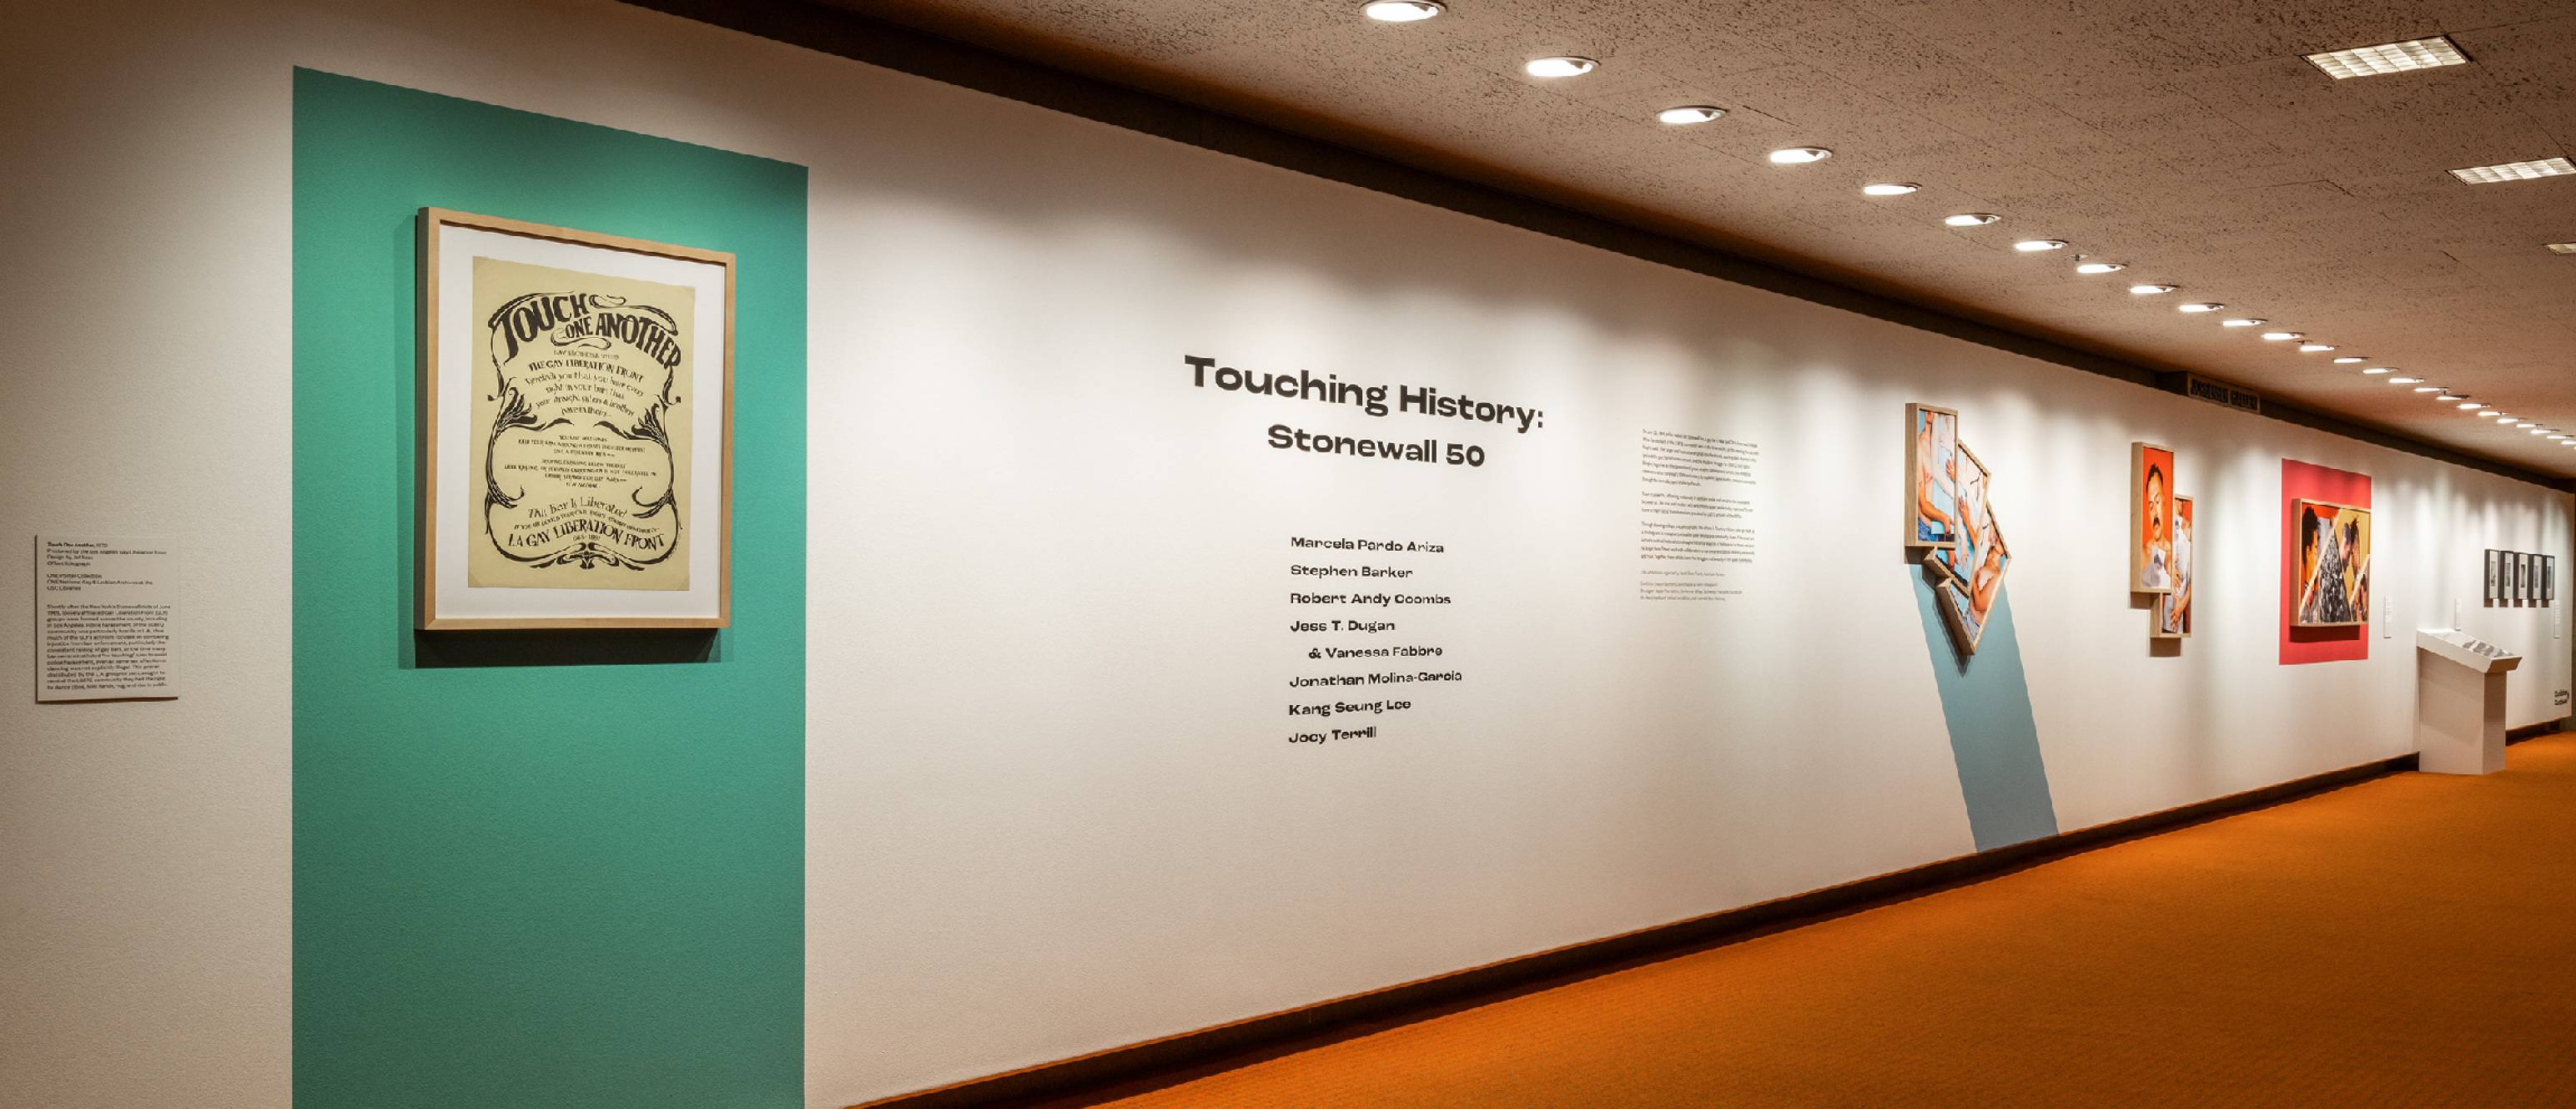 Touching History exhibition, installation photos